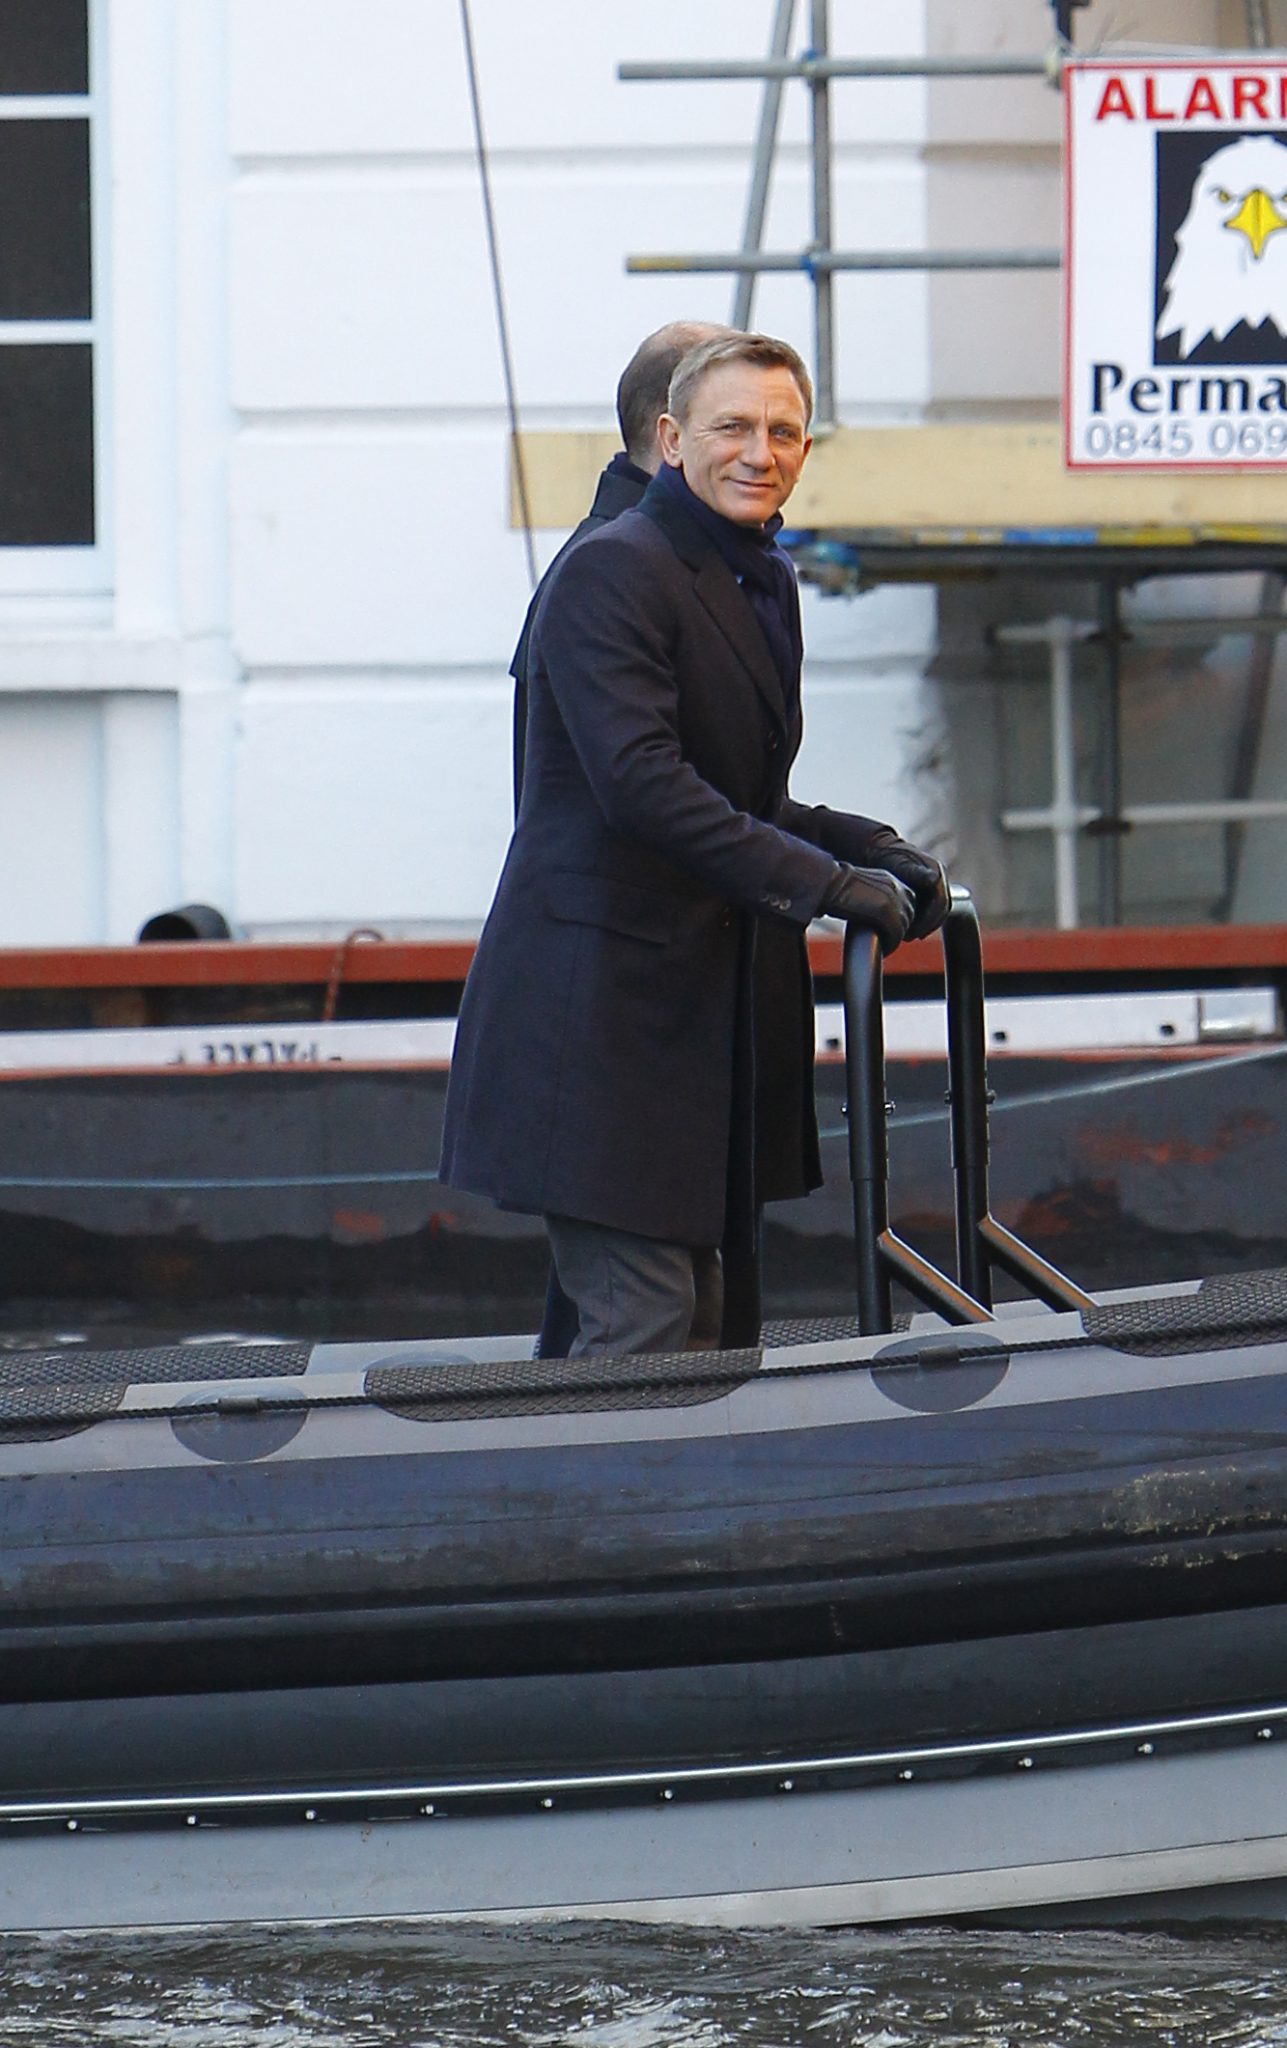 James Bond 007 filming 'Sceptre' in Camden Town, London.

Daniel Craig and Rory Kinnear

BYLINE : ISOIMAGES must be used